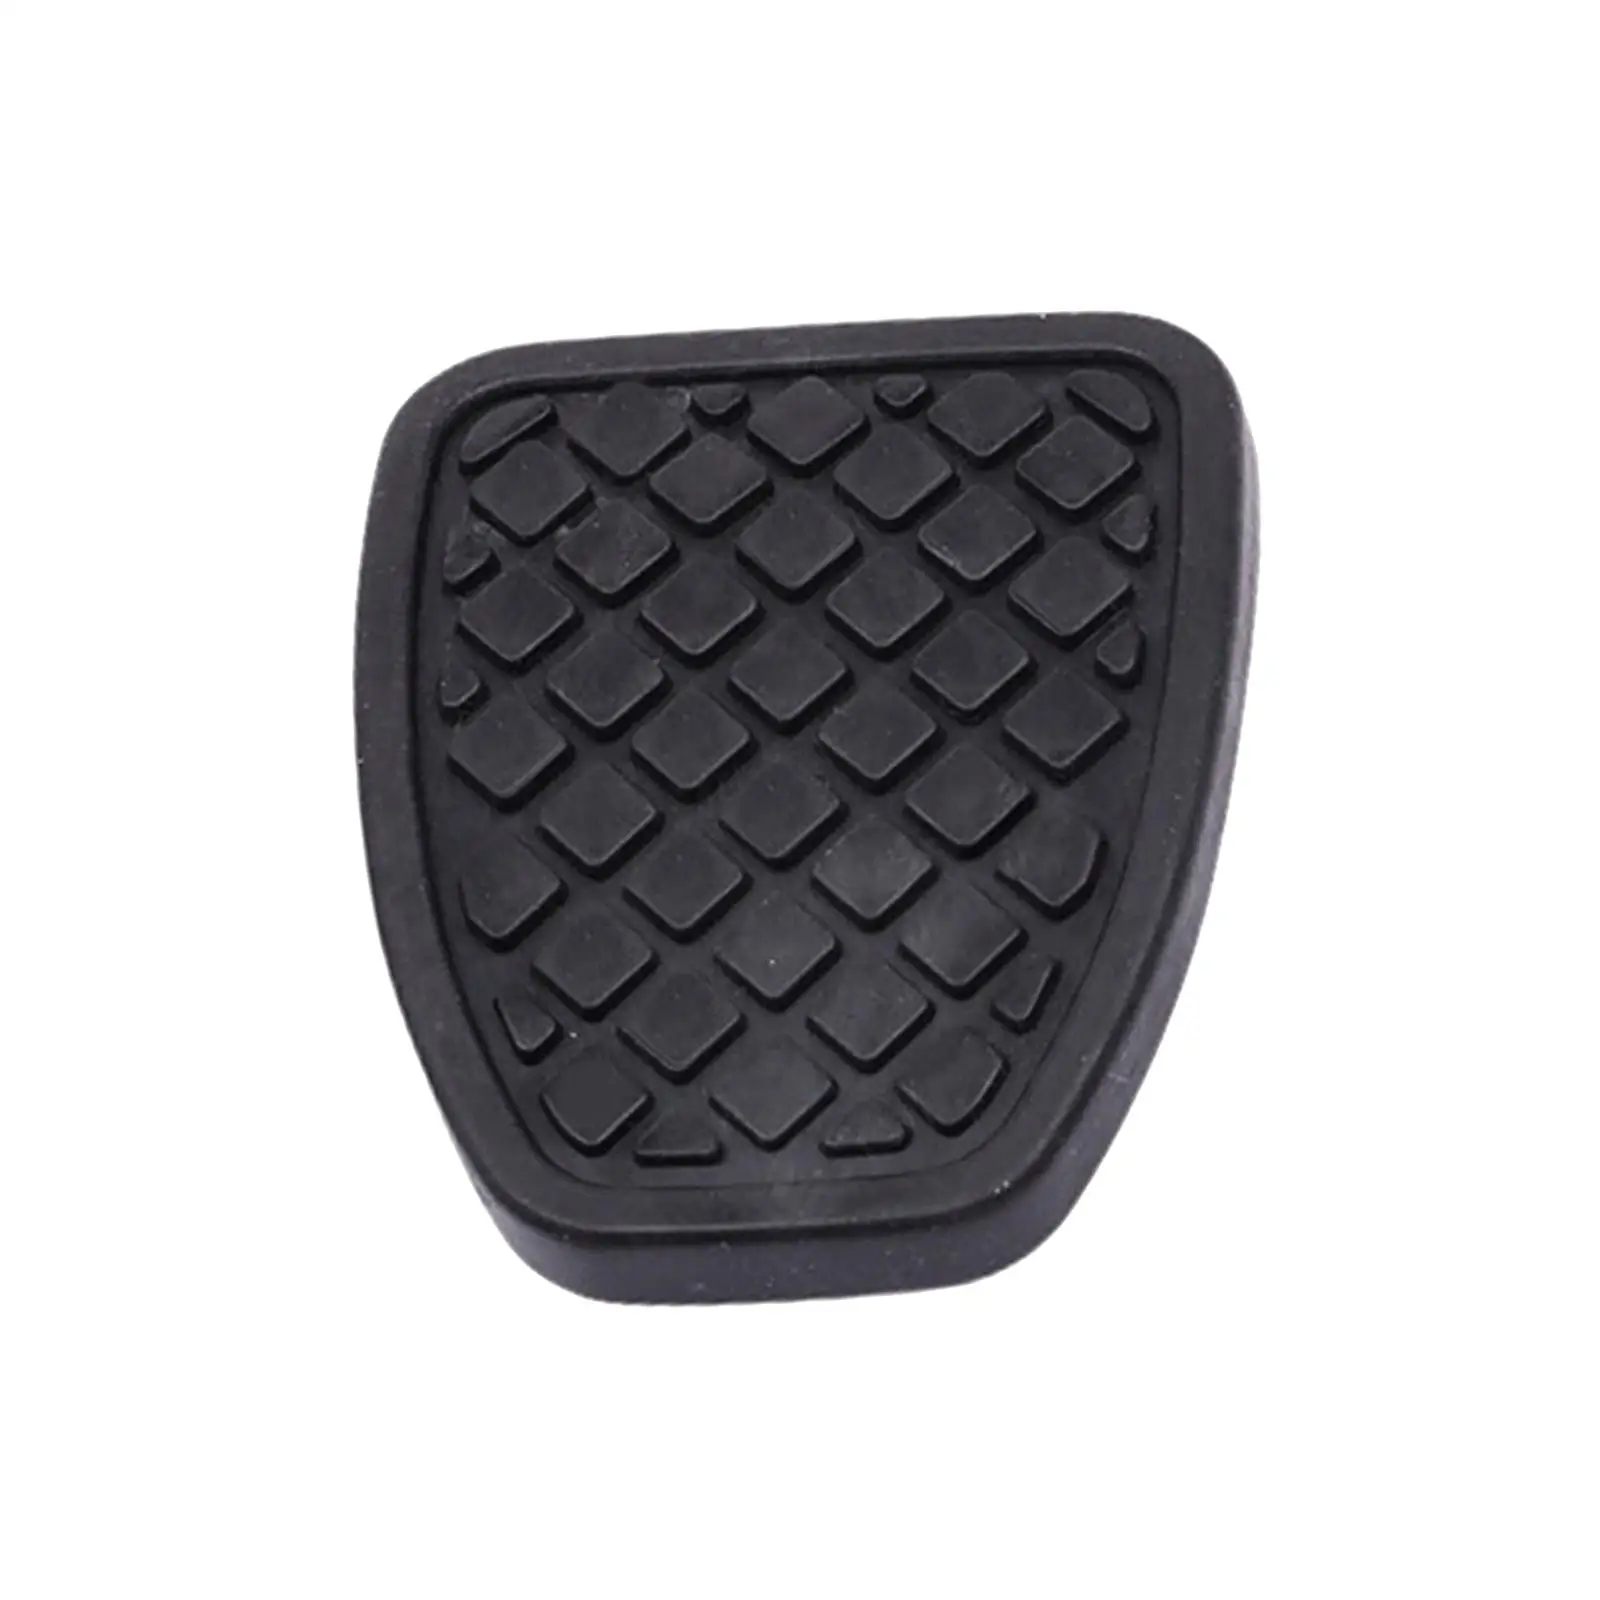 Brake Clutch Pedal Pad Car Accessory High Performance Replace Parts 36015-ga110 for Subaru Impreza Forester Legacy 1996-2017